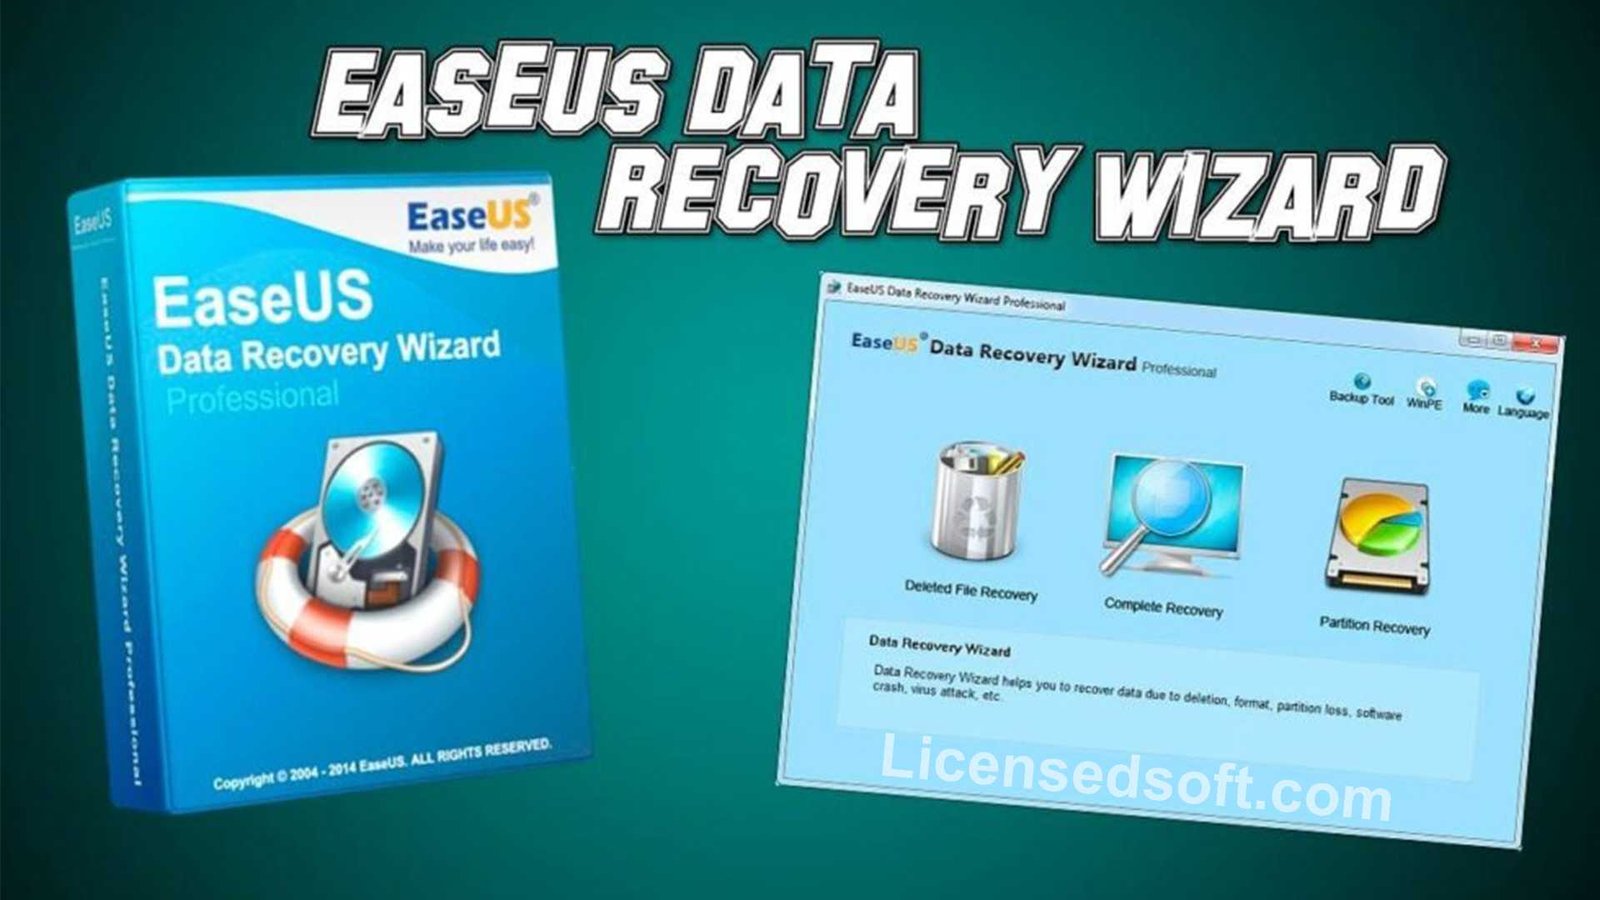 EaseUS Data Recovery Wizard Pro 13.8.5 For macOS Lifetime Premium cover photo by licensedsoft